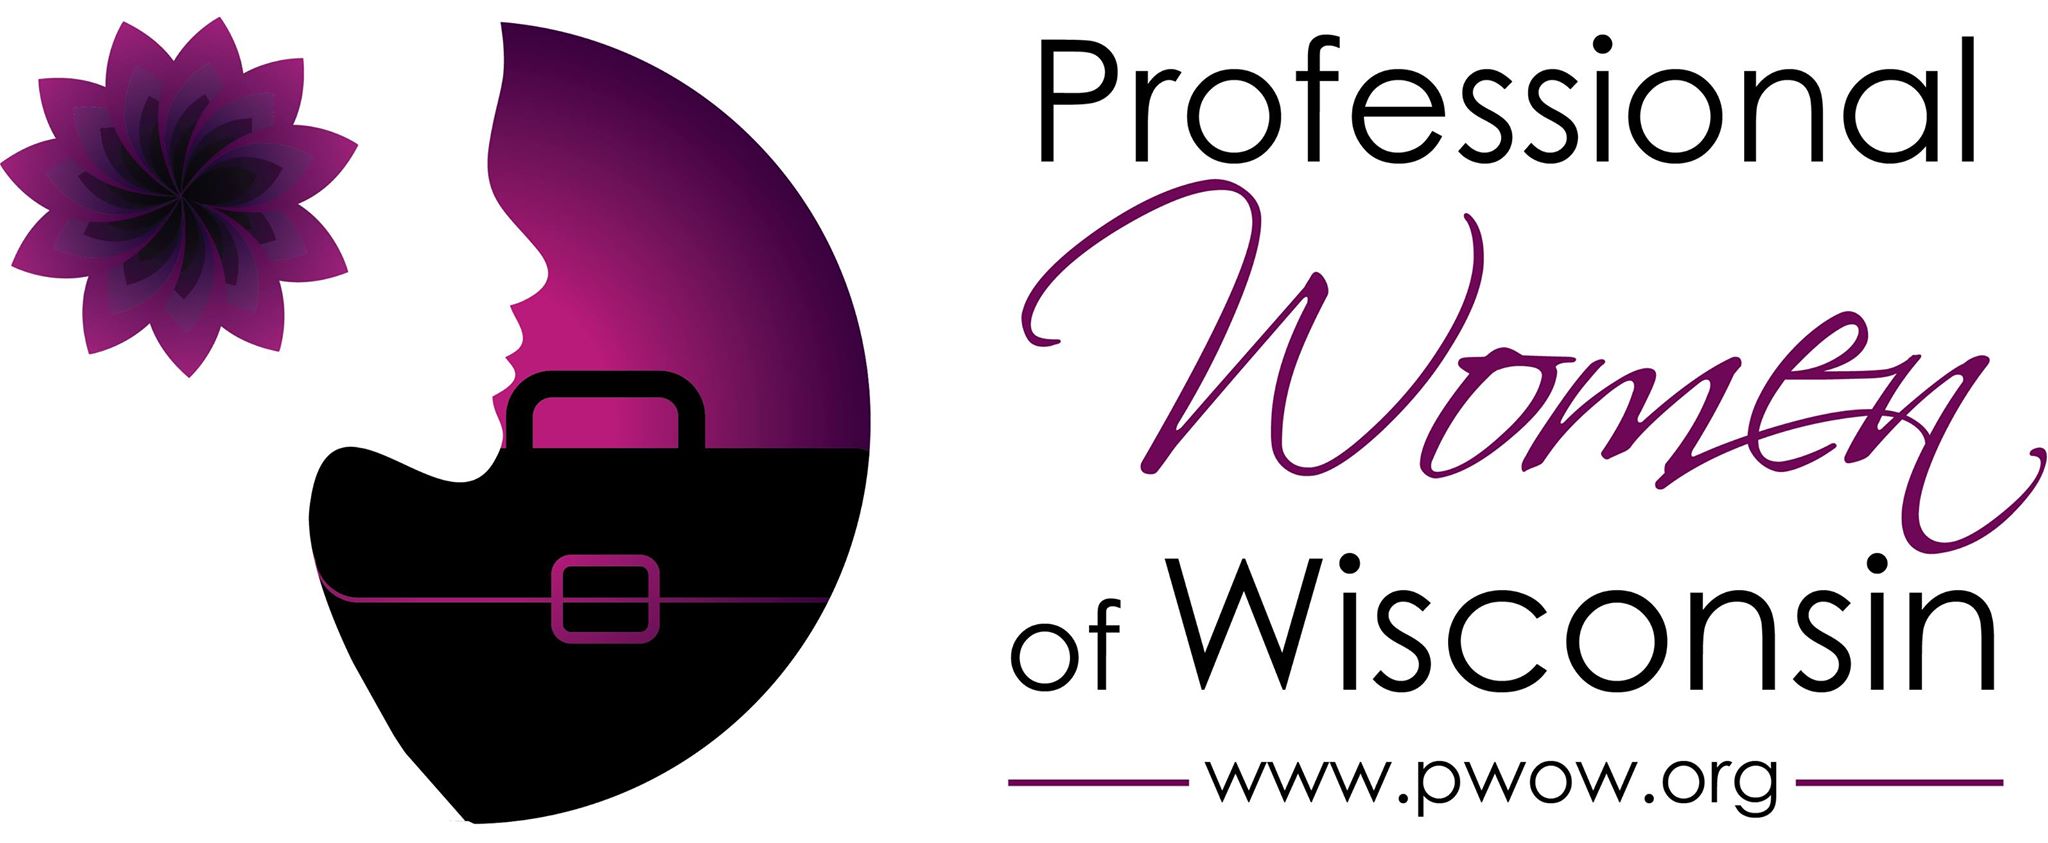 Professional Women of WI (PWoW) Networking